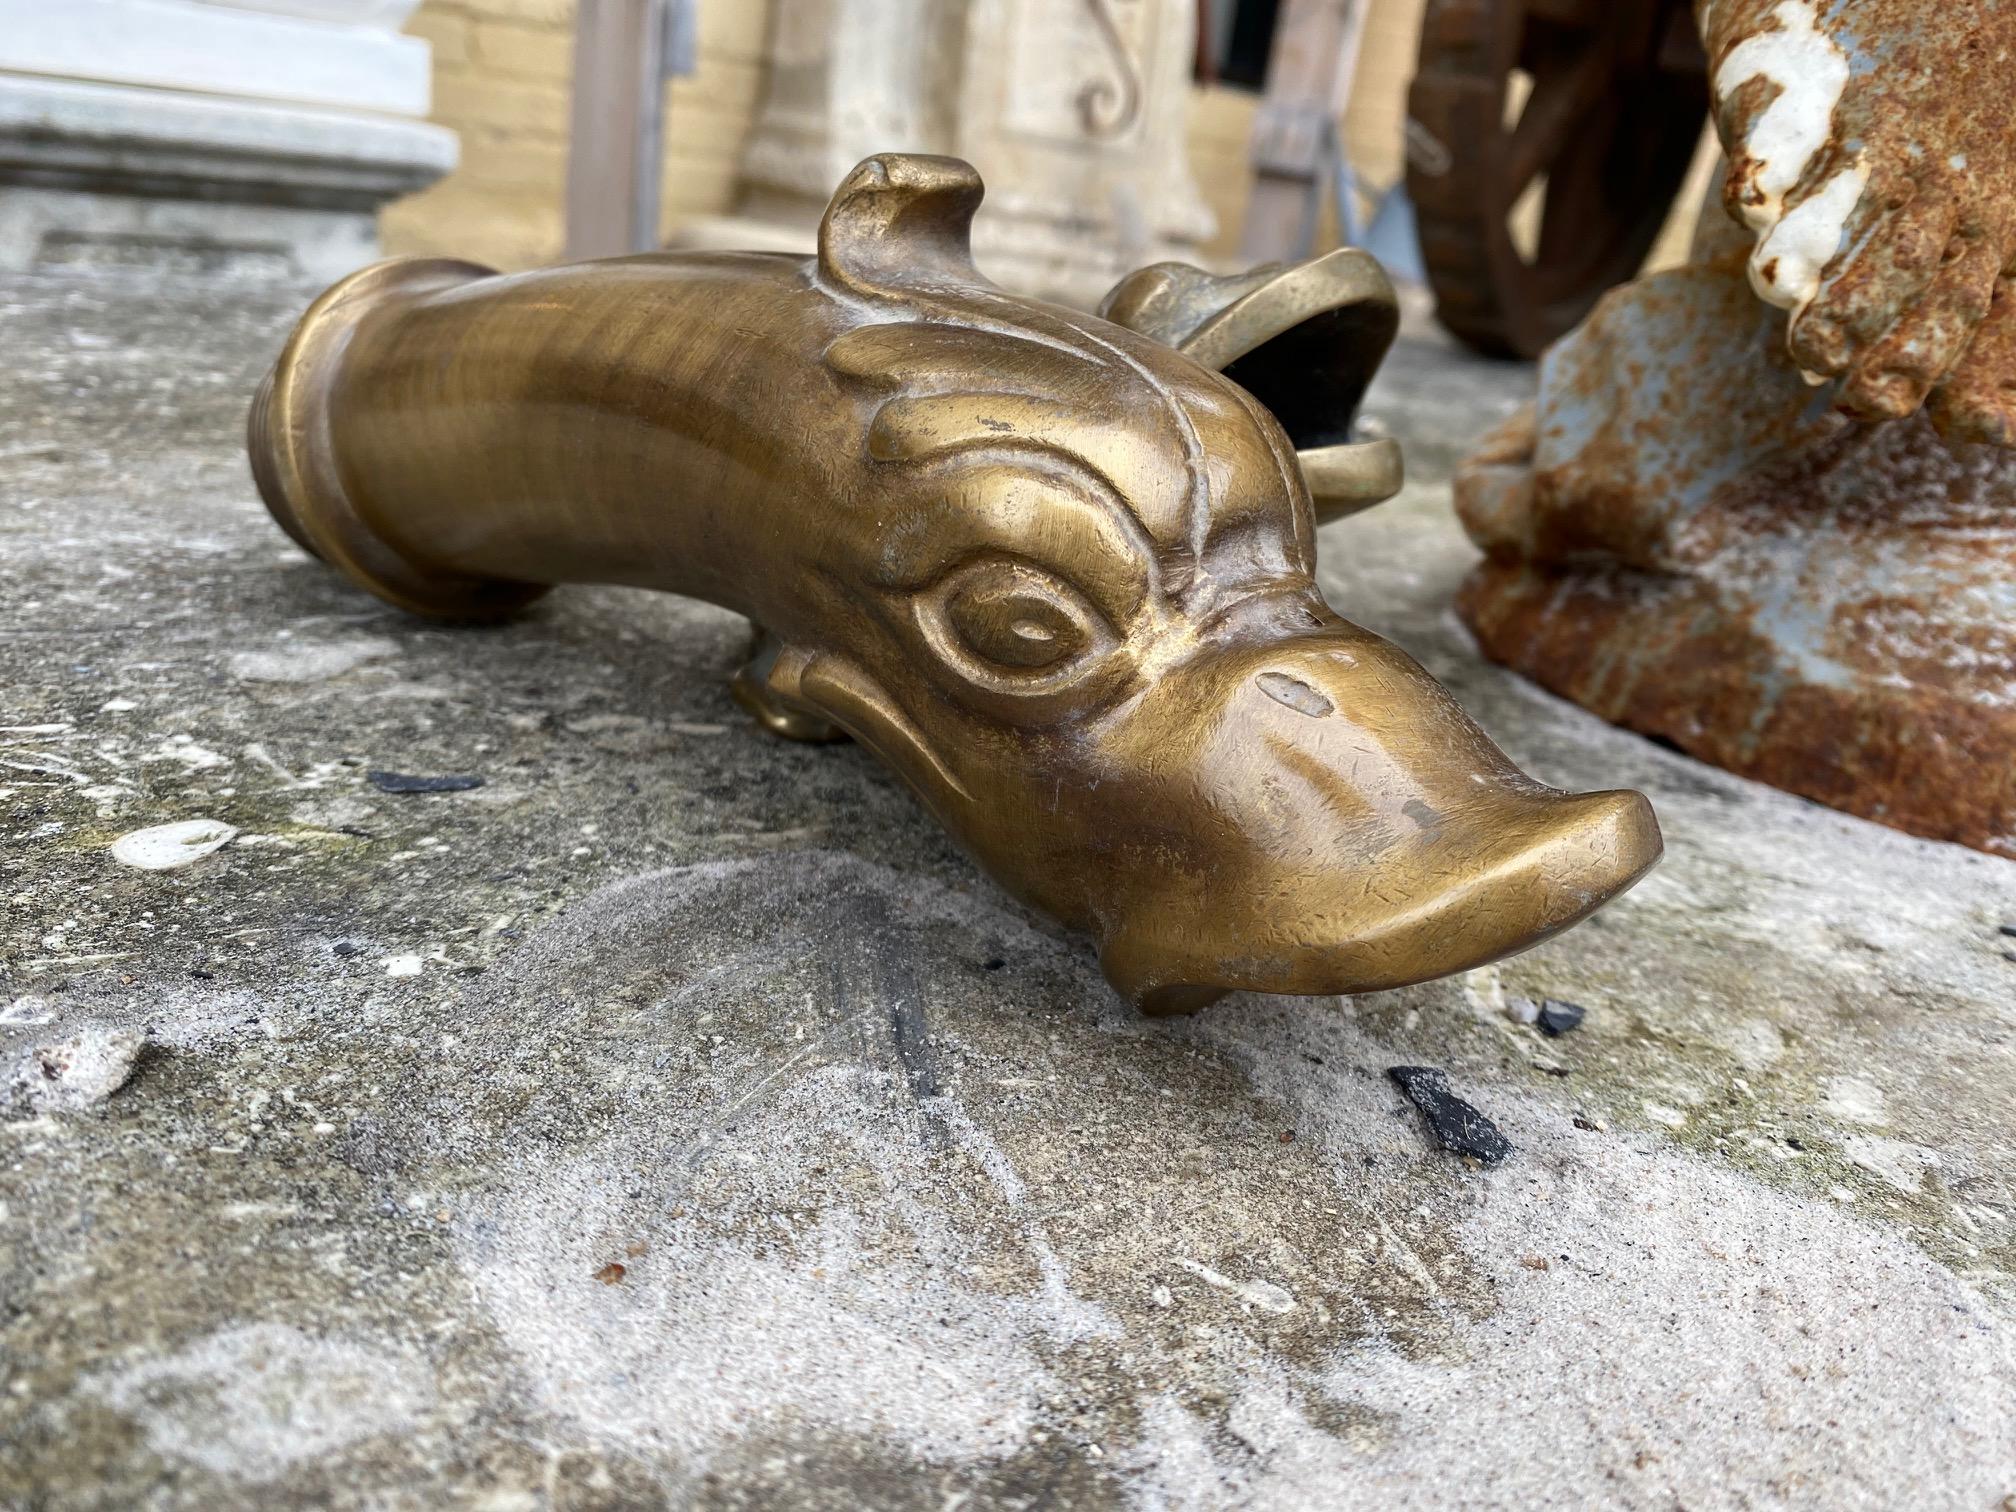 Brass Dolphin grotesque spout / water exit. Made in France.

Measurements: 9